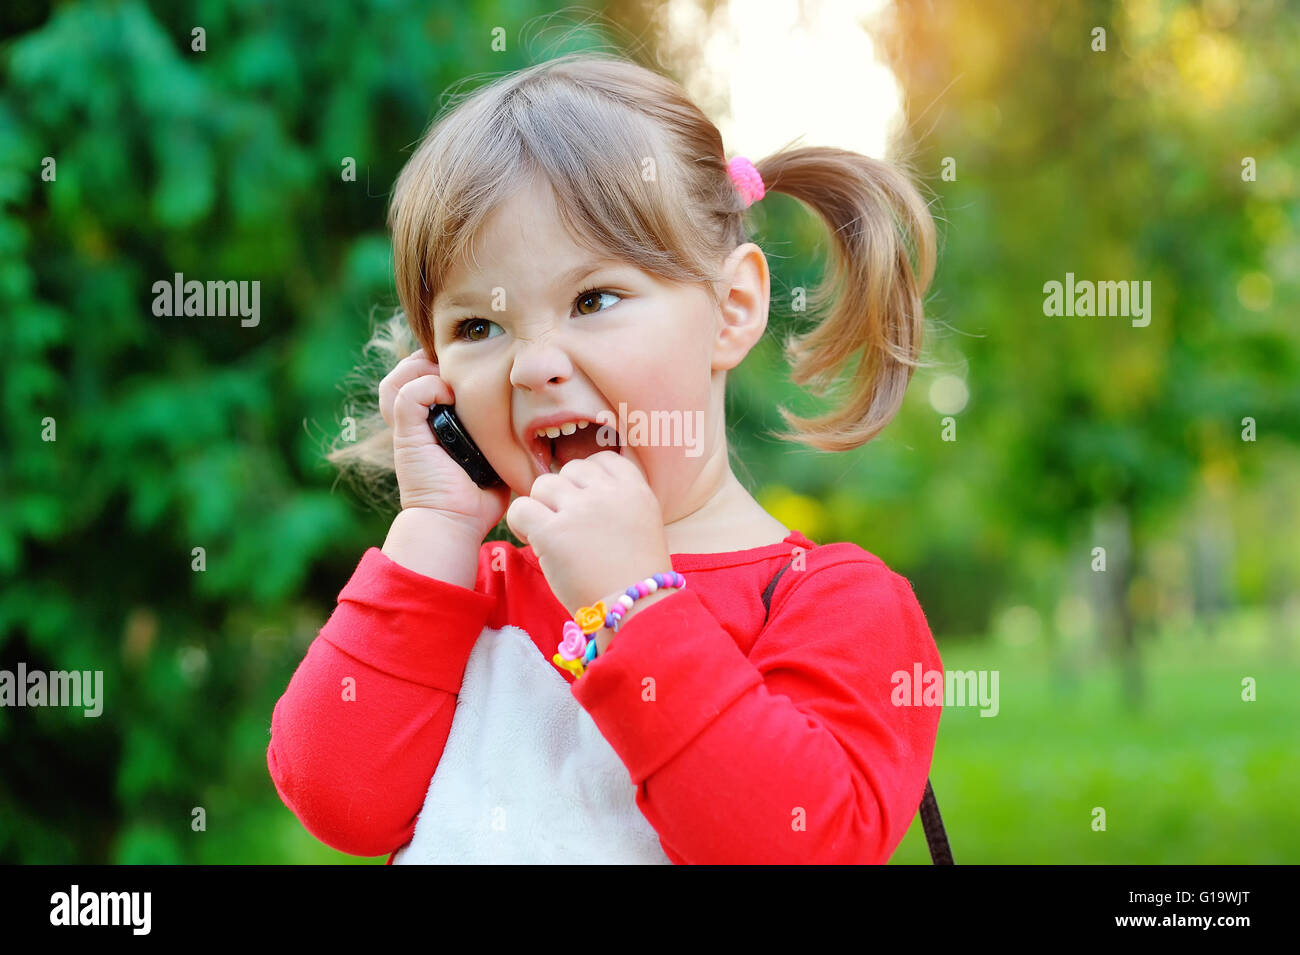 Little girl shouting into the phone in a park Stock Photo